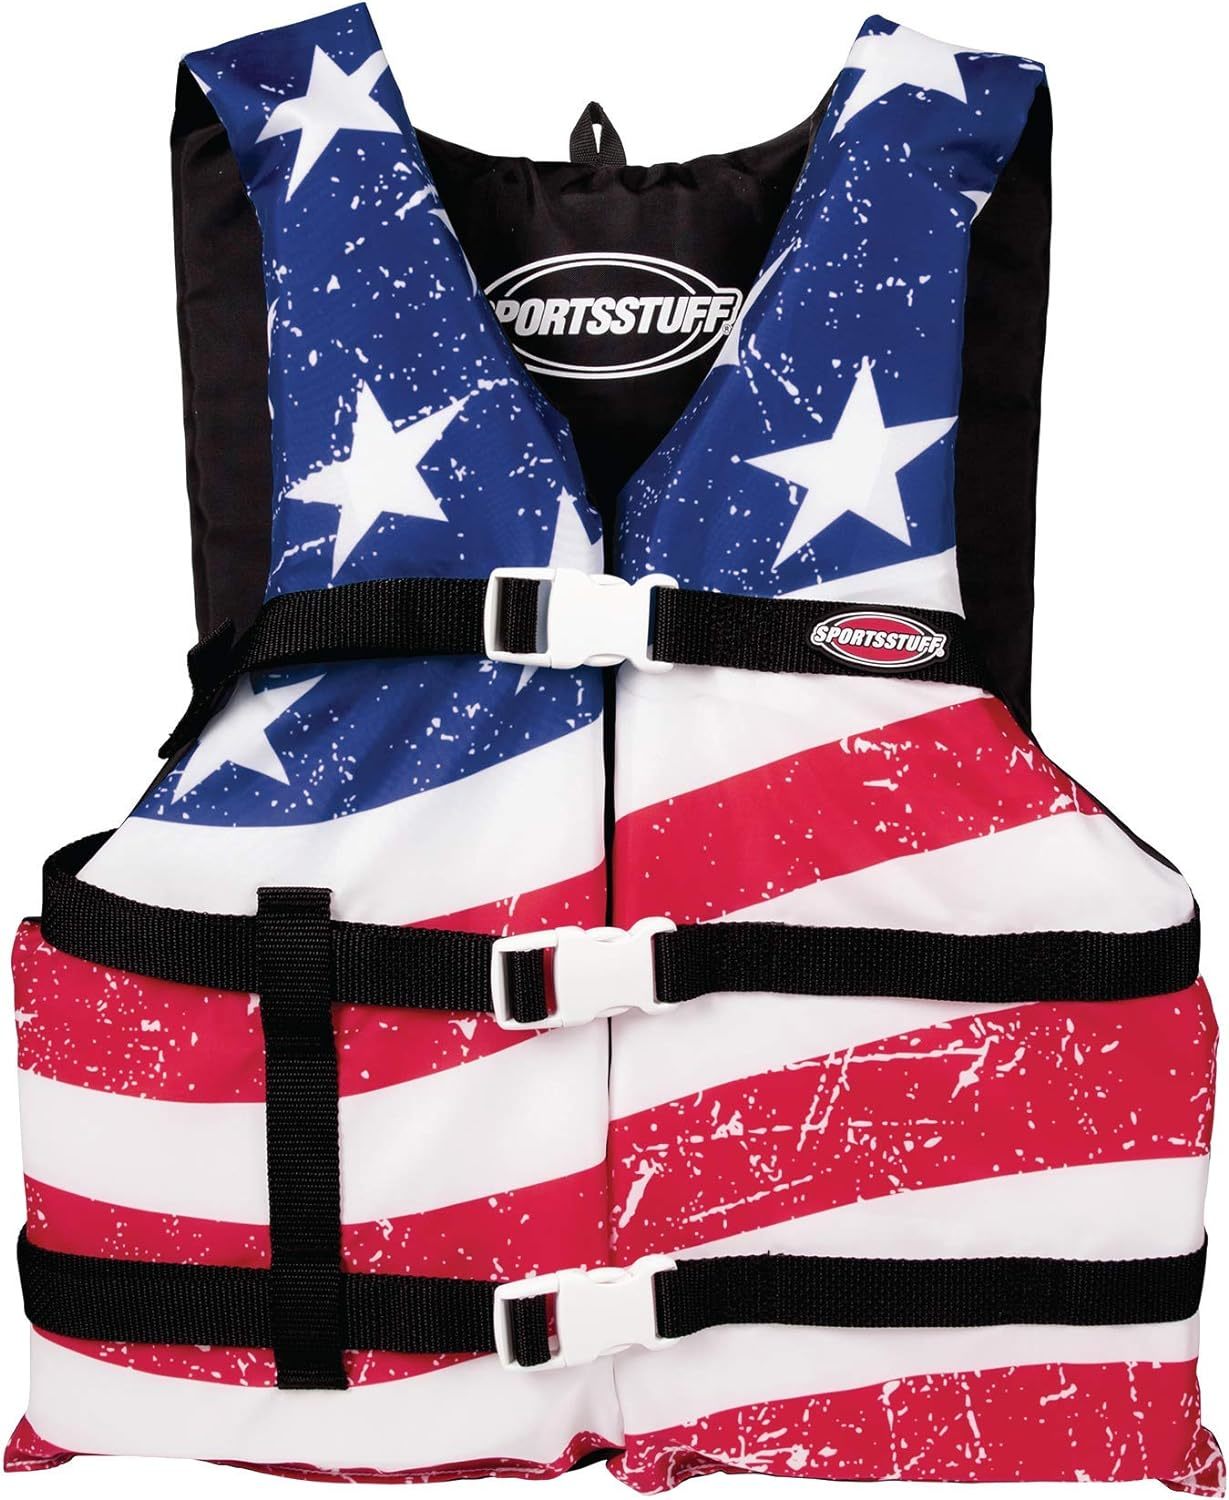 Child, Youth, And Adult Sportsstuff Stars And Stripes Life Jacket. - $41.96